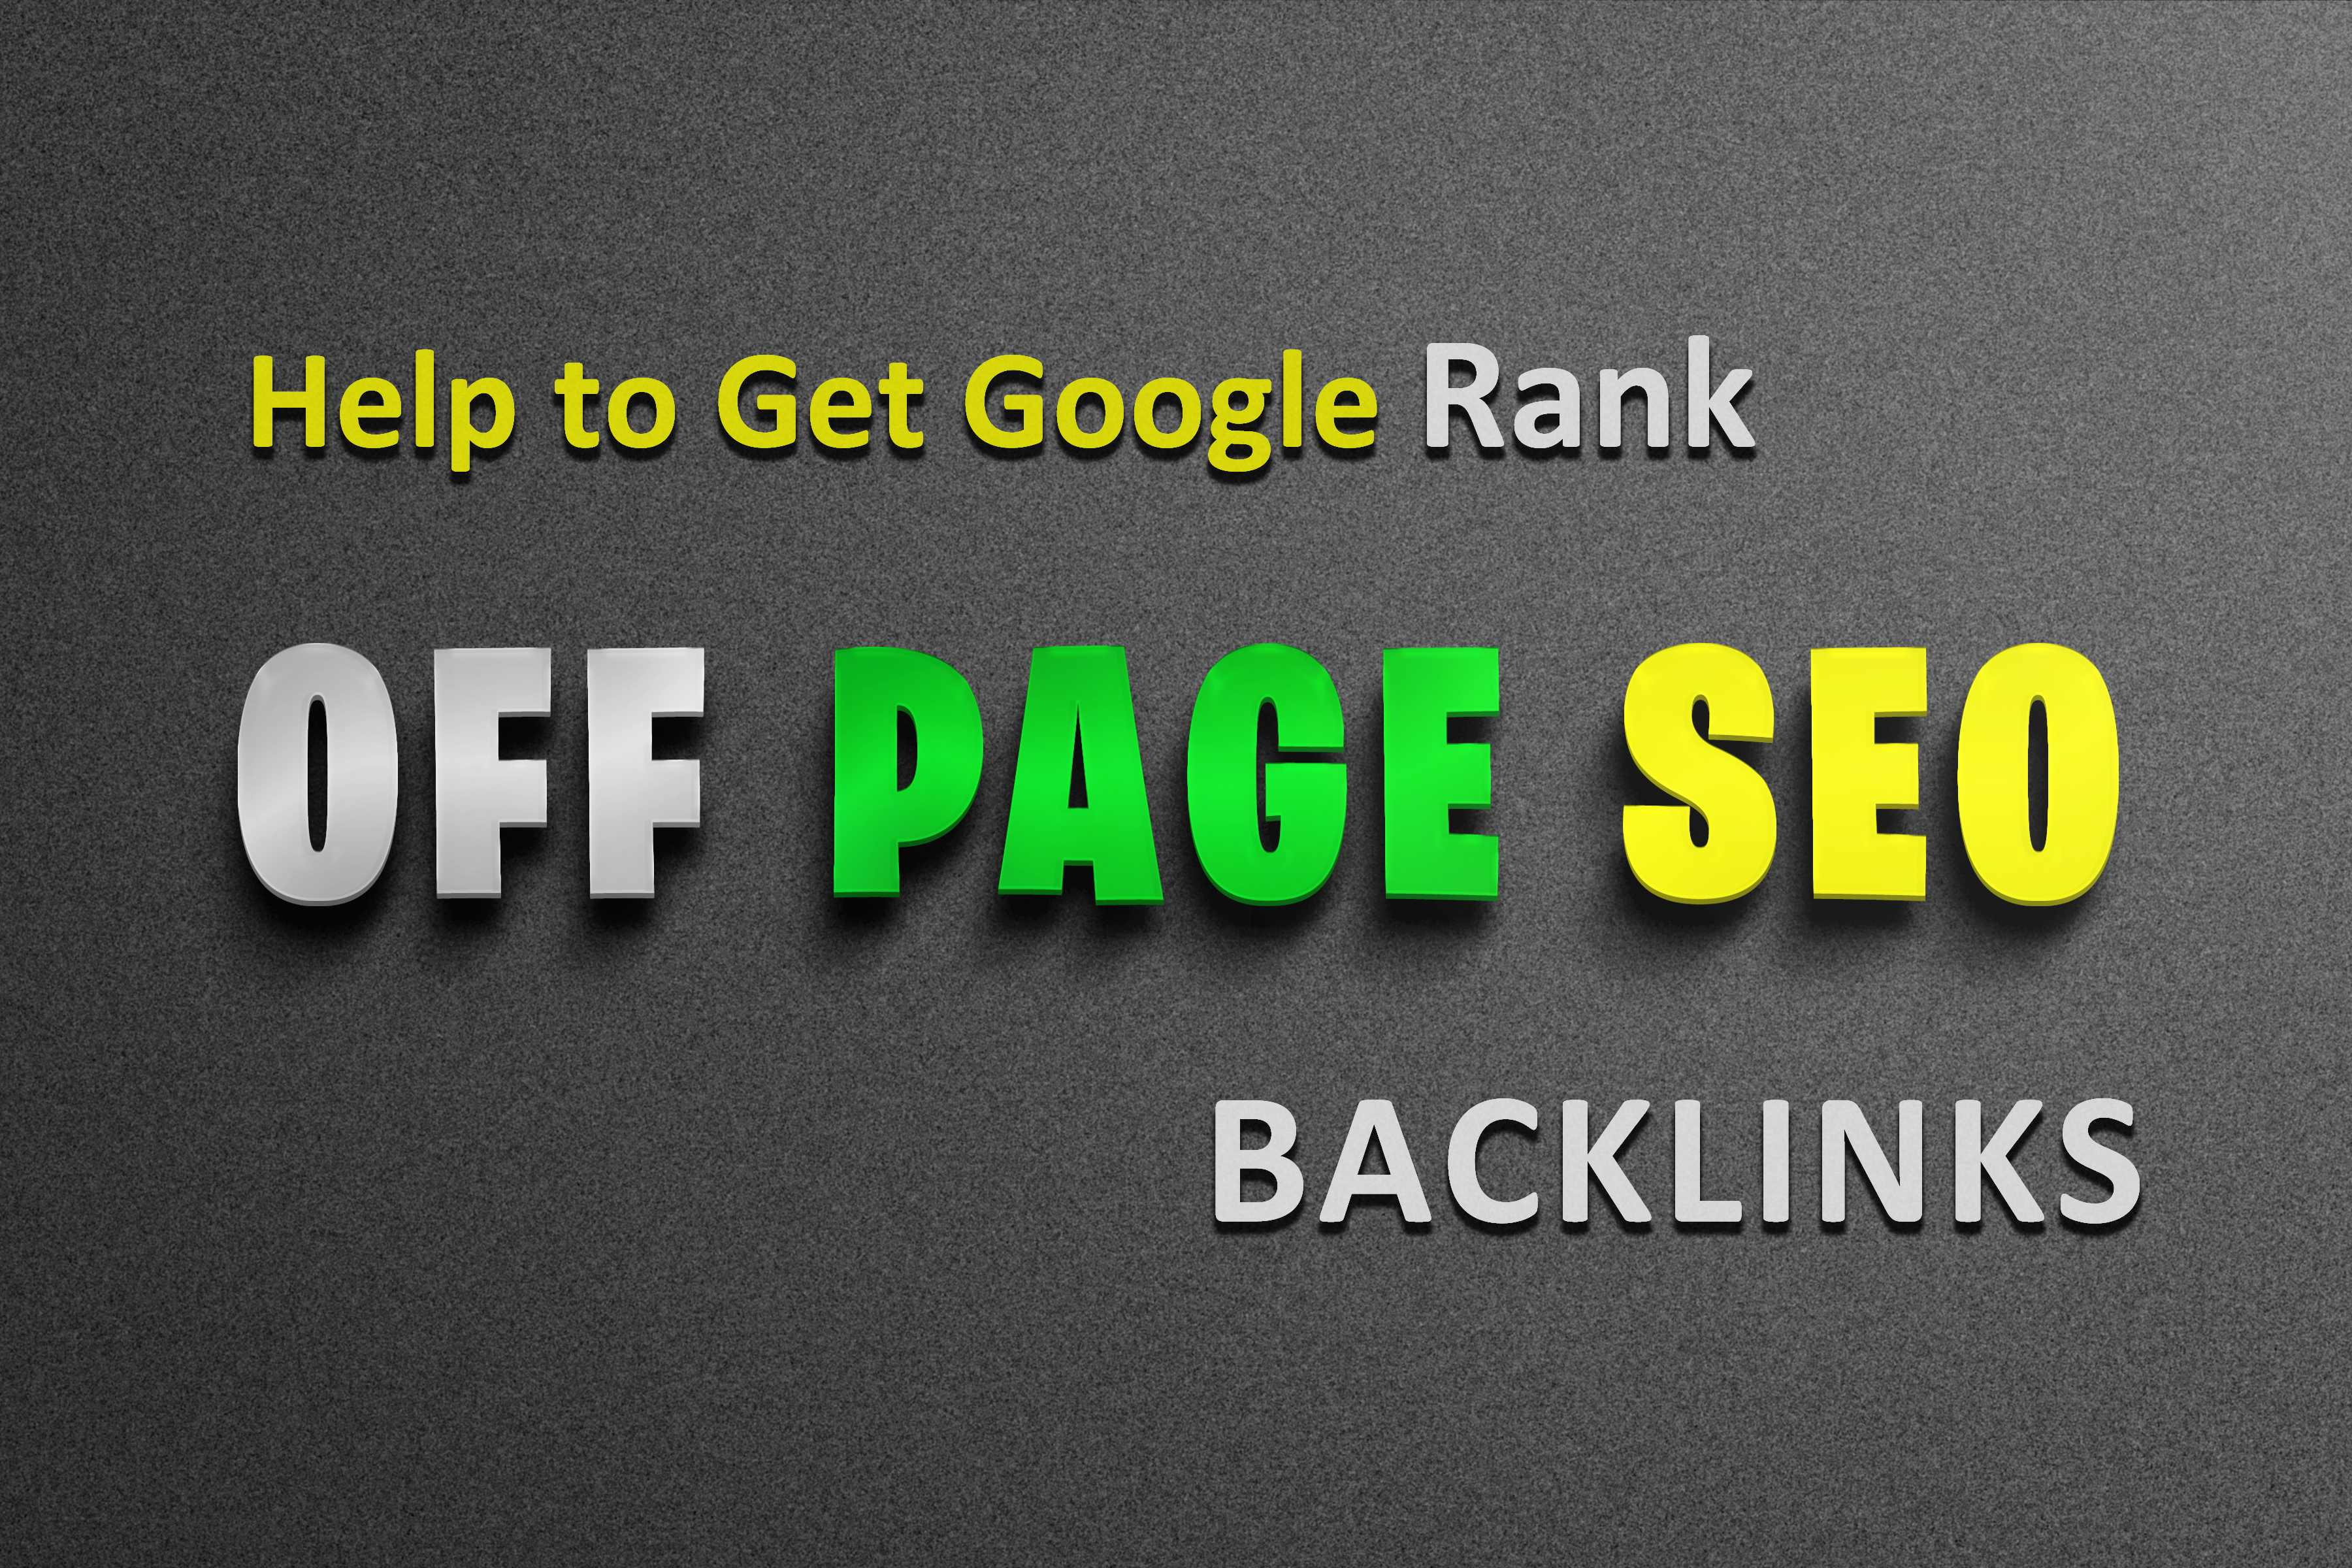 N0. 1 Google Ranking -- Off Page SEO Backlink PACK -- trusted links - White hat SEO link plan